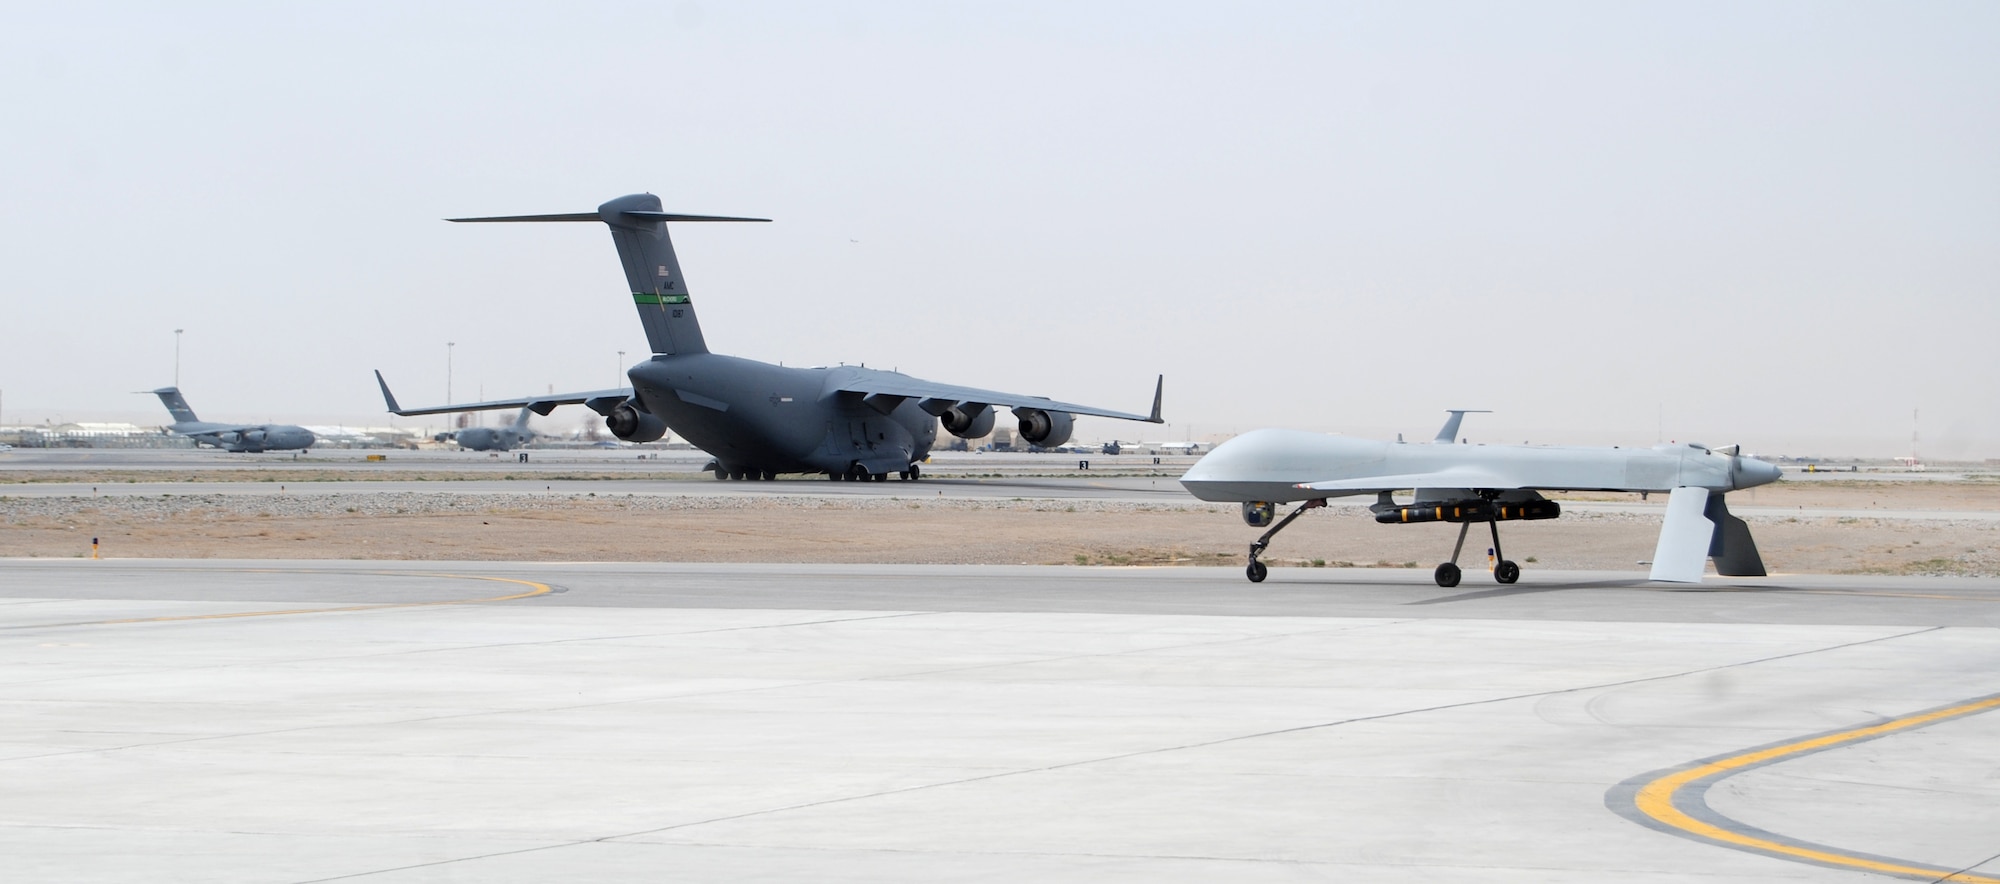 An MQ-1 Predator waits for a taxiing C-17 Globemaster III at Kandahar Airfield, March 20, 2014. The MQ-1 is assigned to and operated by the 451st Air Expeditionary Group. (U.S. Air Force photo by Capt. Brian Wagner/Released) (Image cropped to emphasize aircraft.)